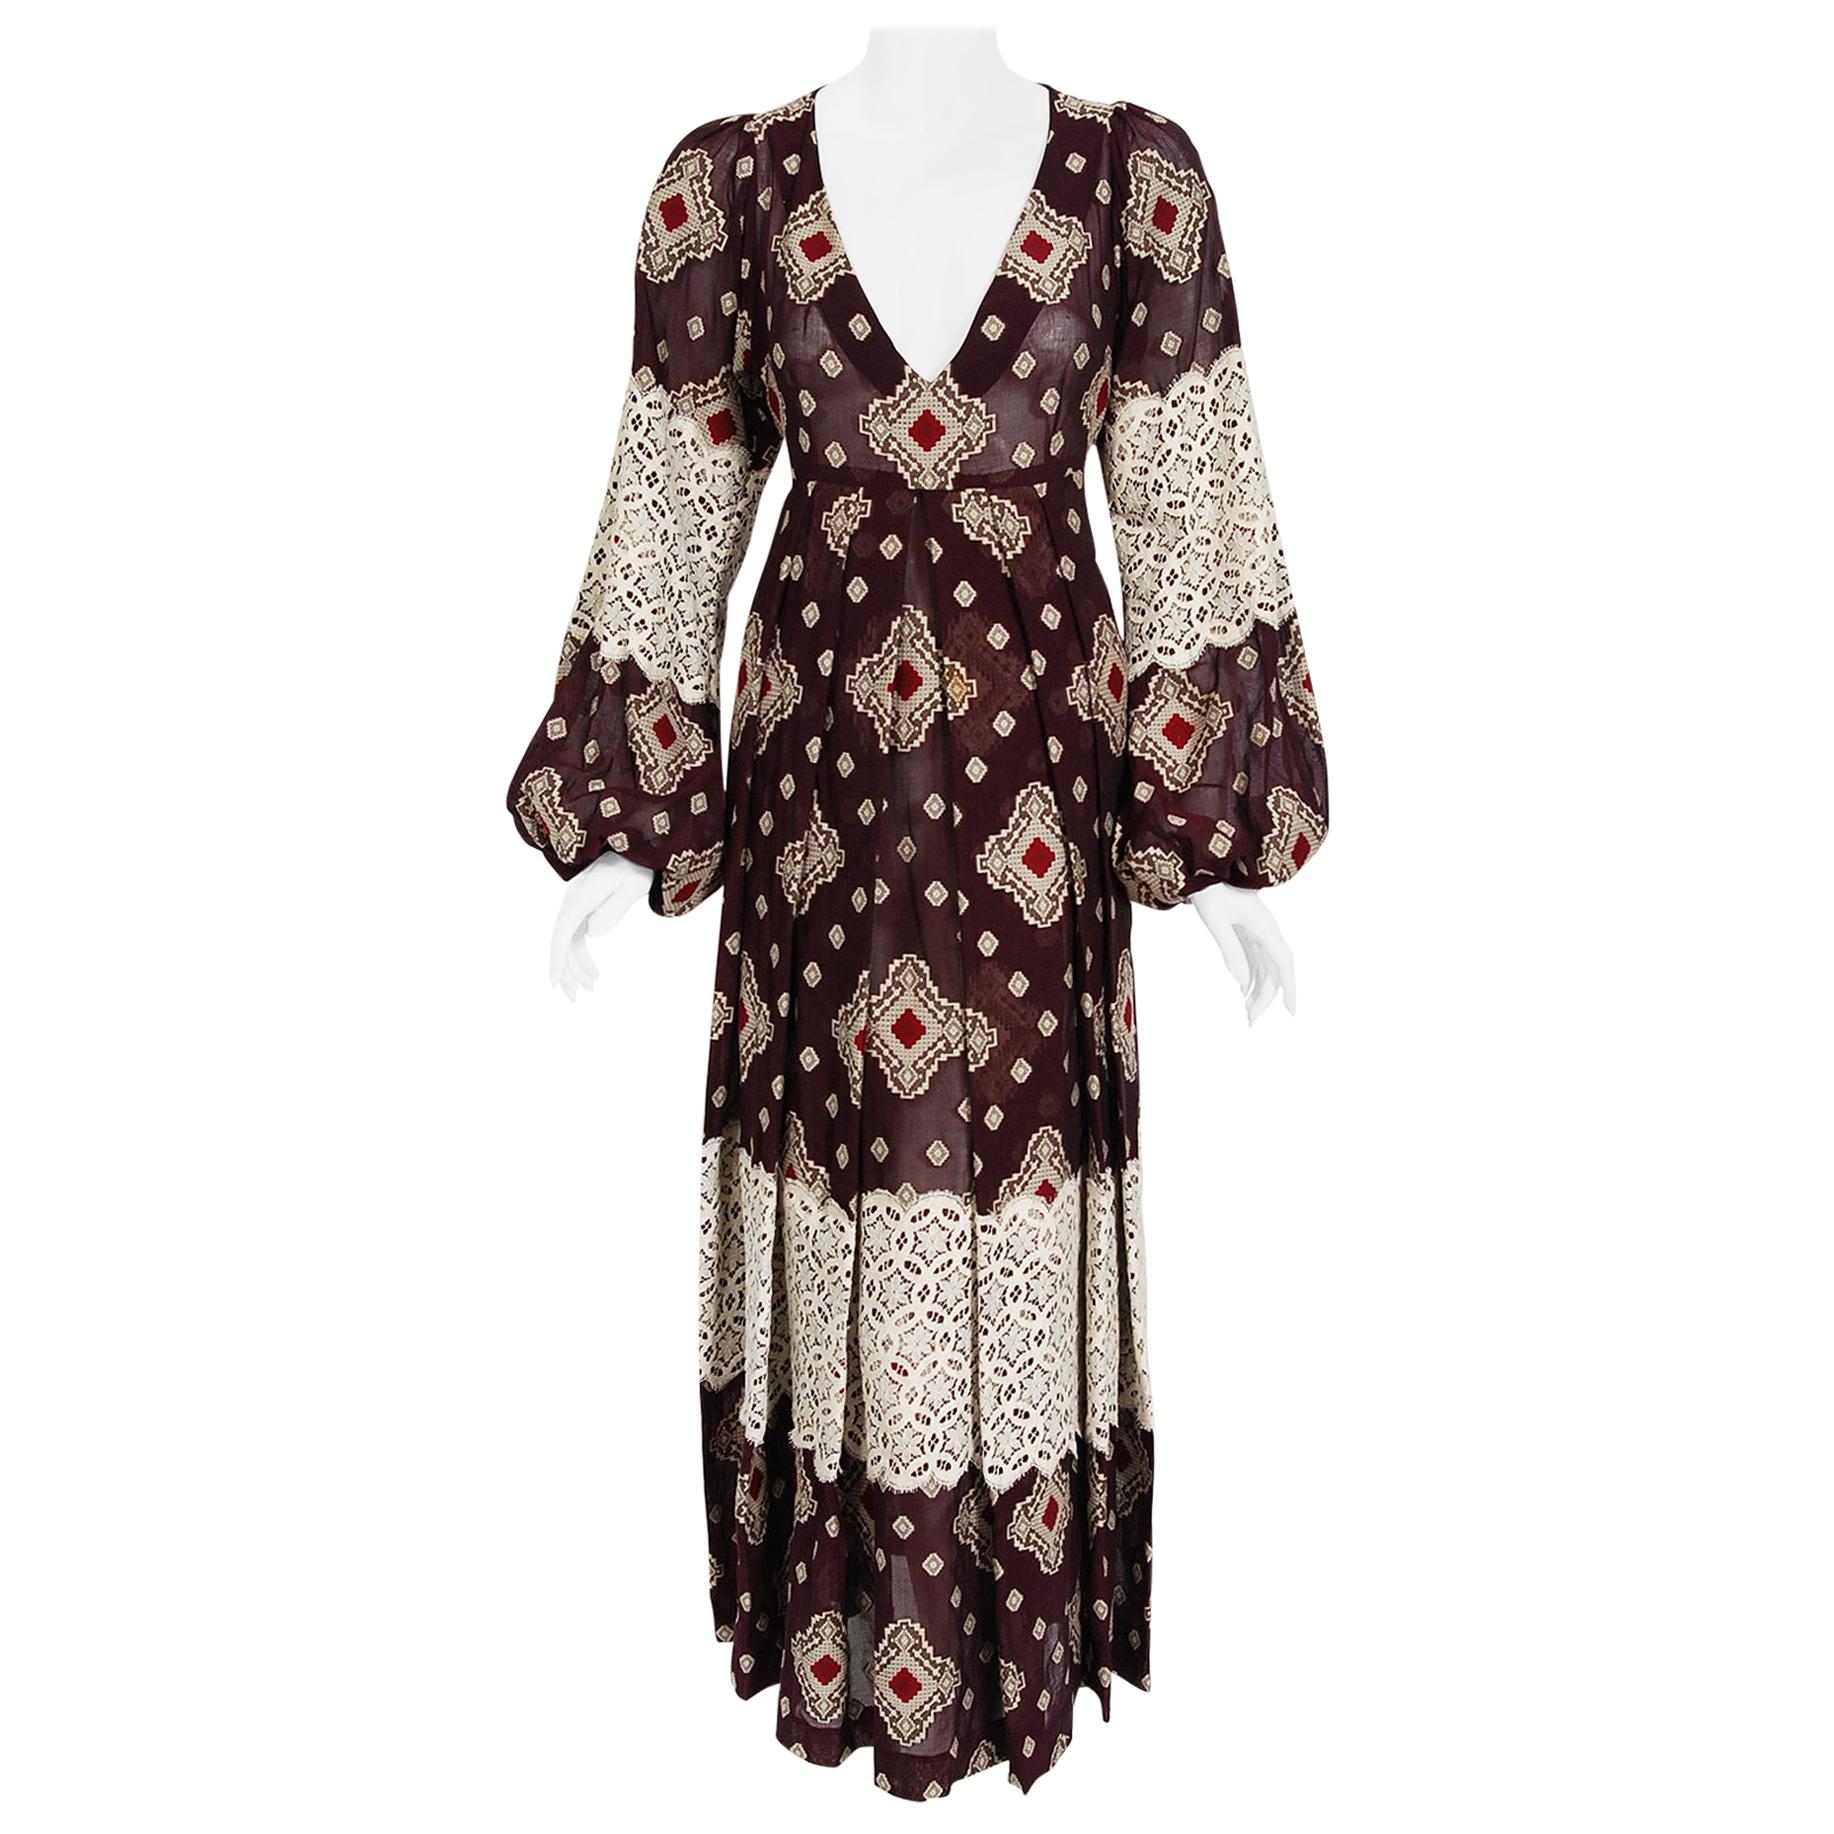 Vintage 1971 Thea Porter Brocaded Cotton & Lace Low Cut Billow-Sleeve Maxi Dress